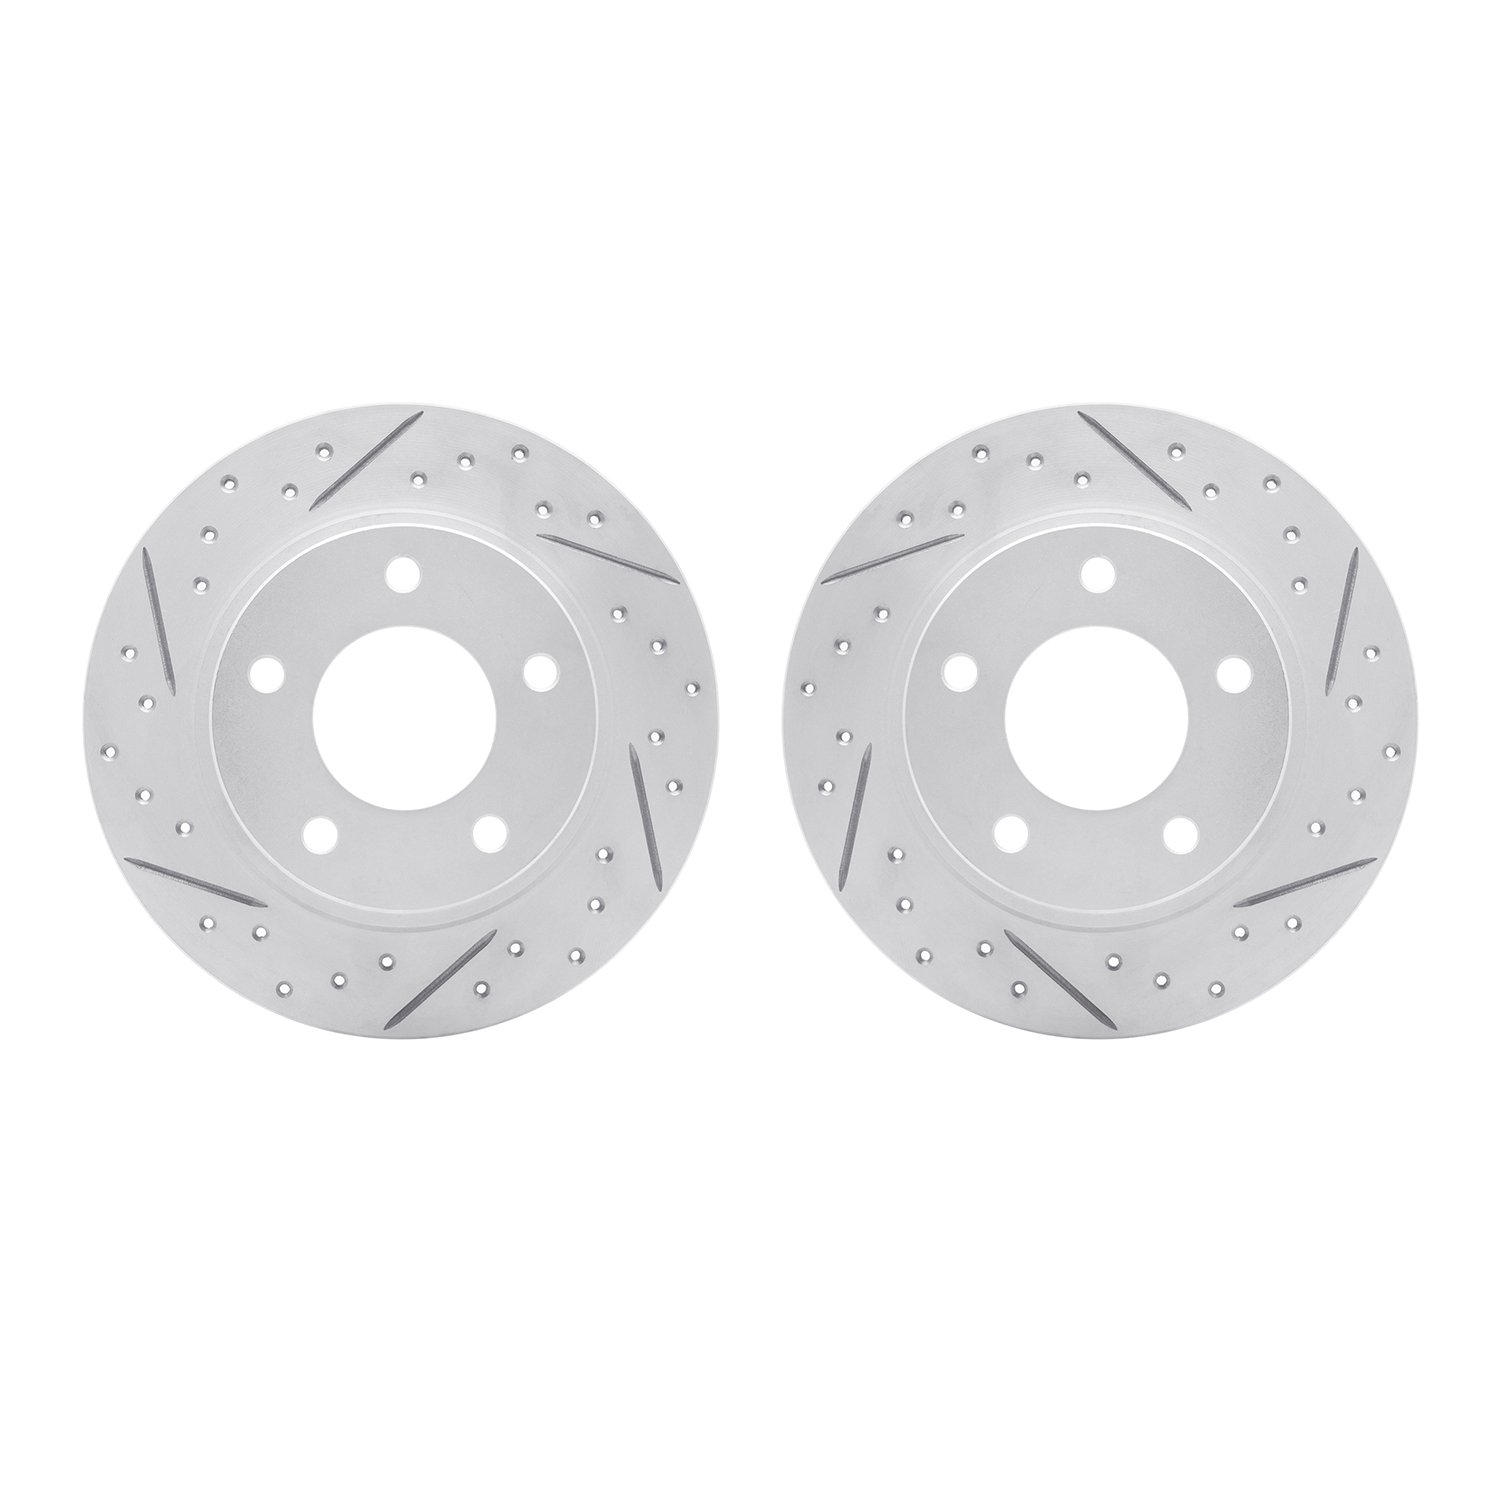 2002-80029 Geoperformance Drilled/Slotted Brake Rotors, 1993-2003 Ford/Lincoln/Mercury/Mazda, Position: Rear